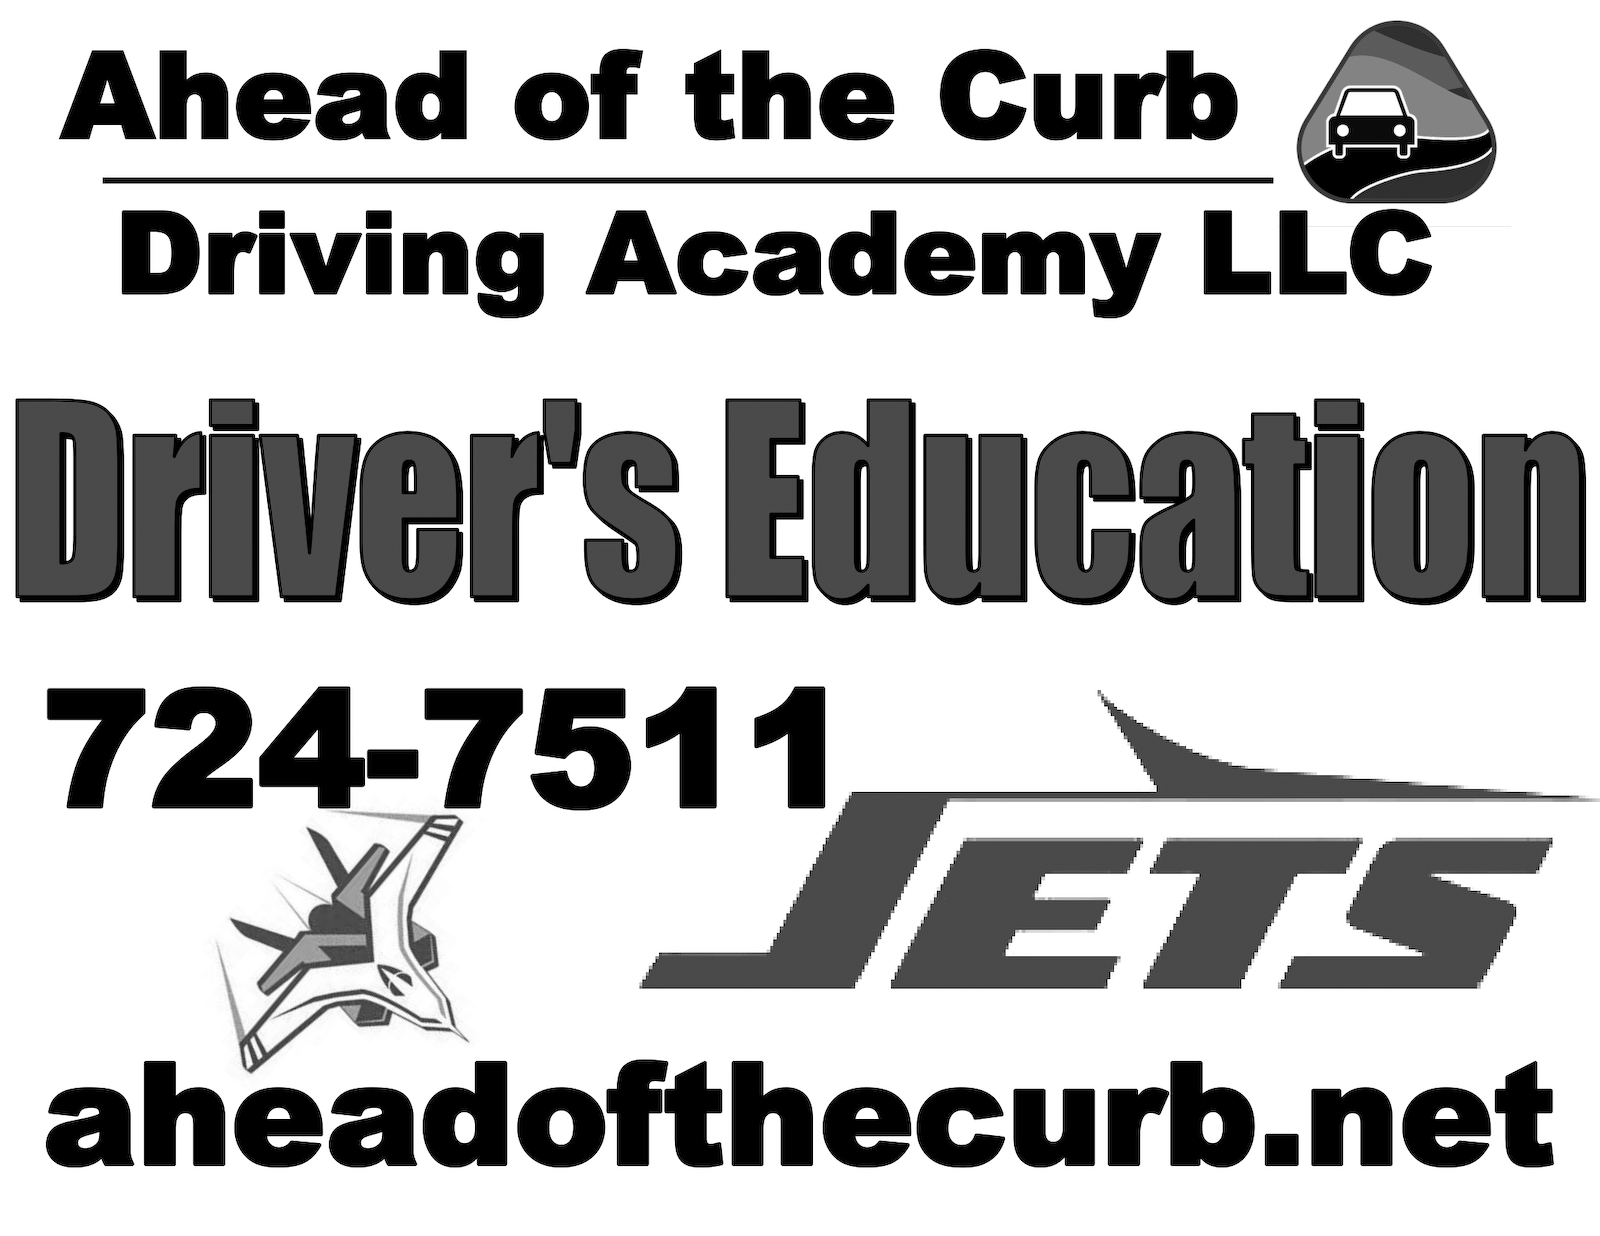 Ahead of the Curb Driving Academy